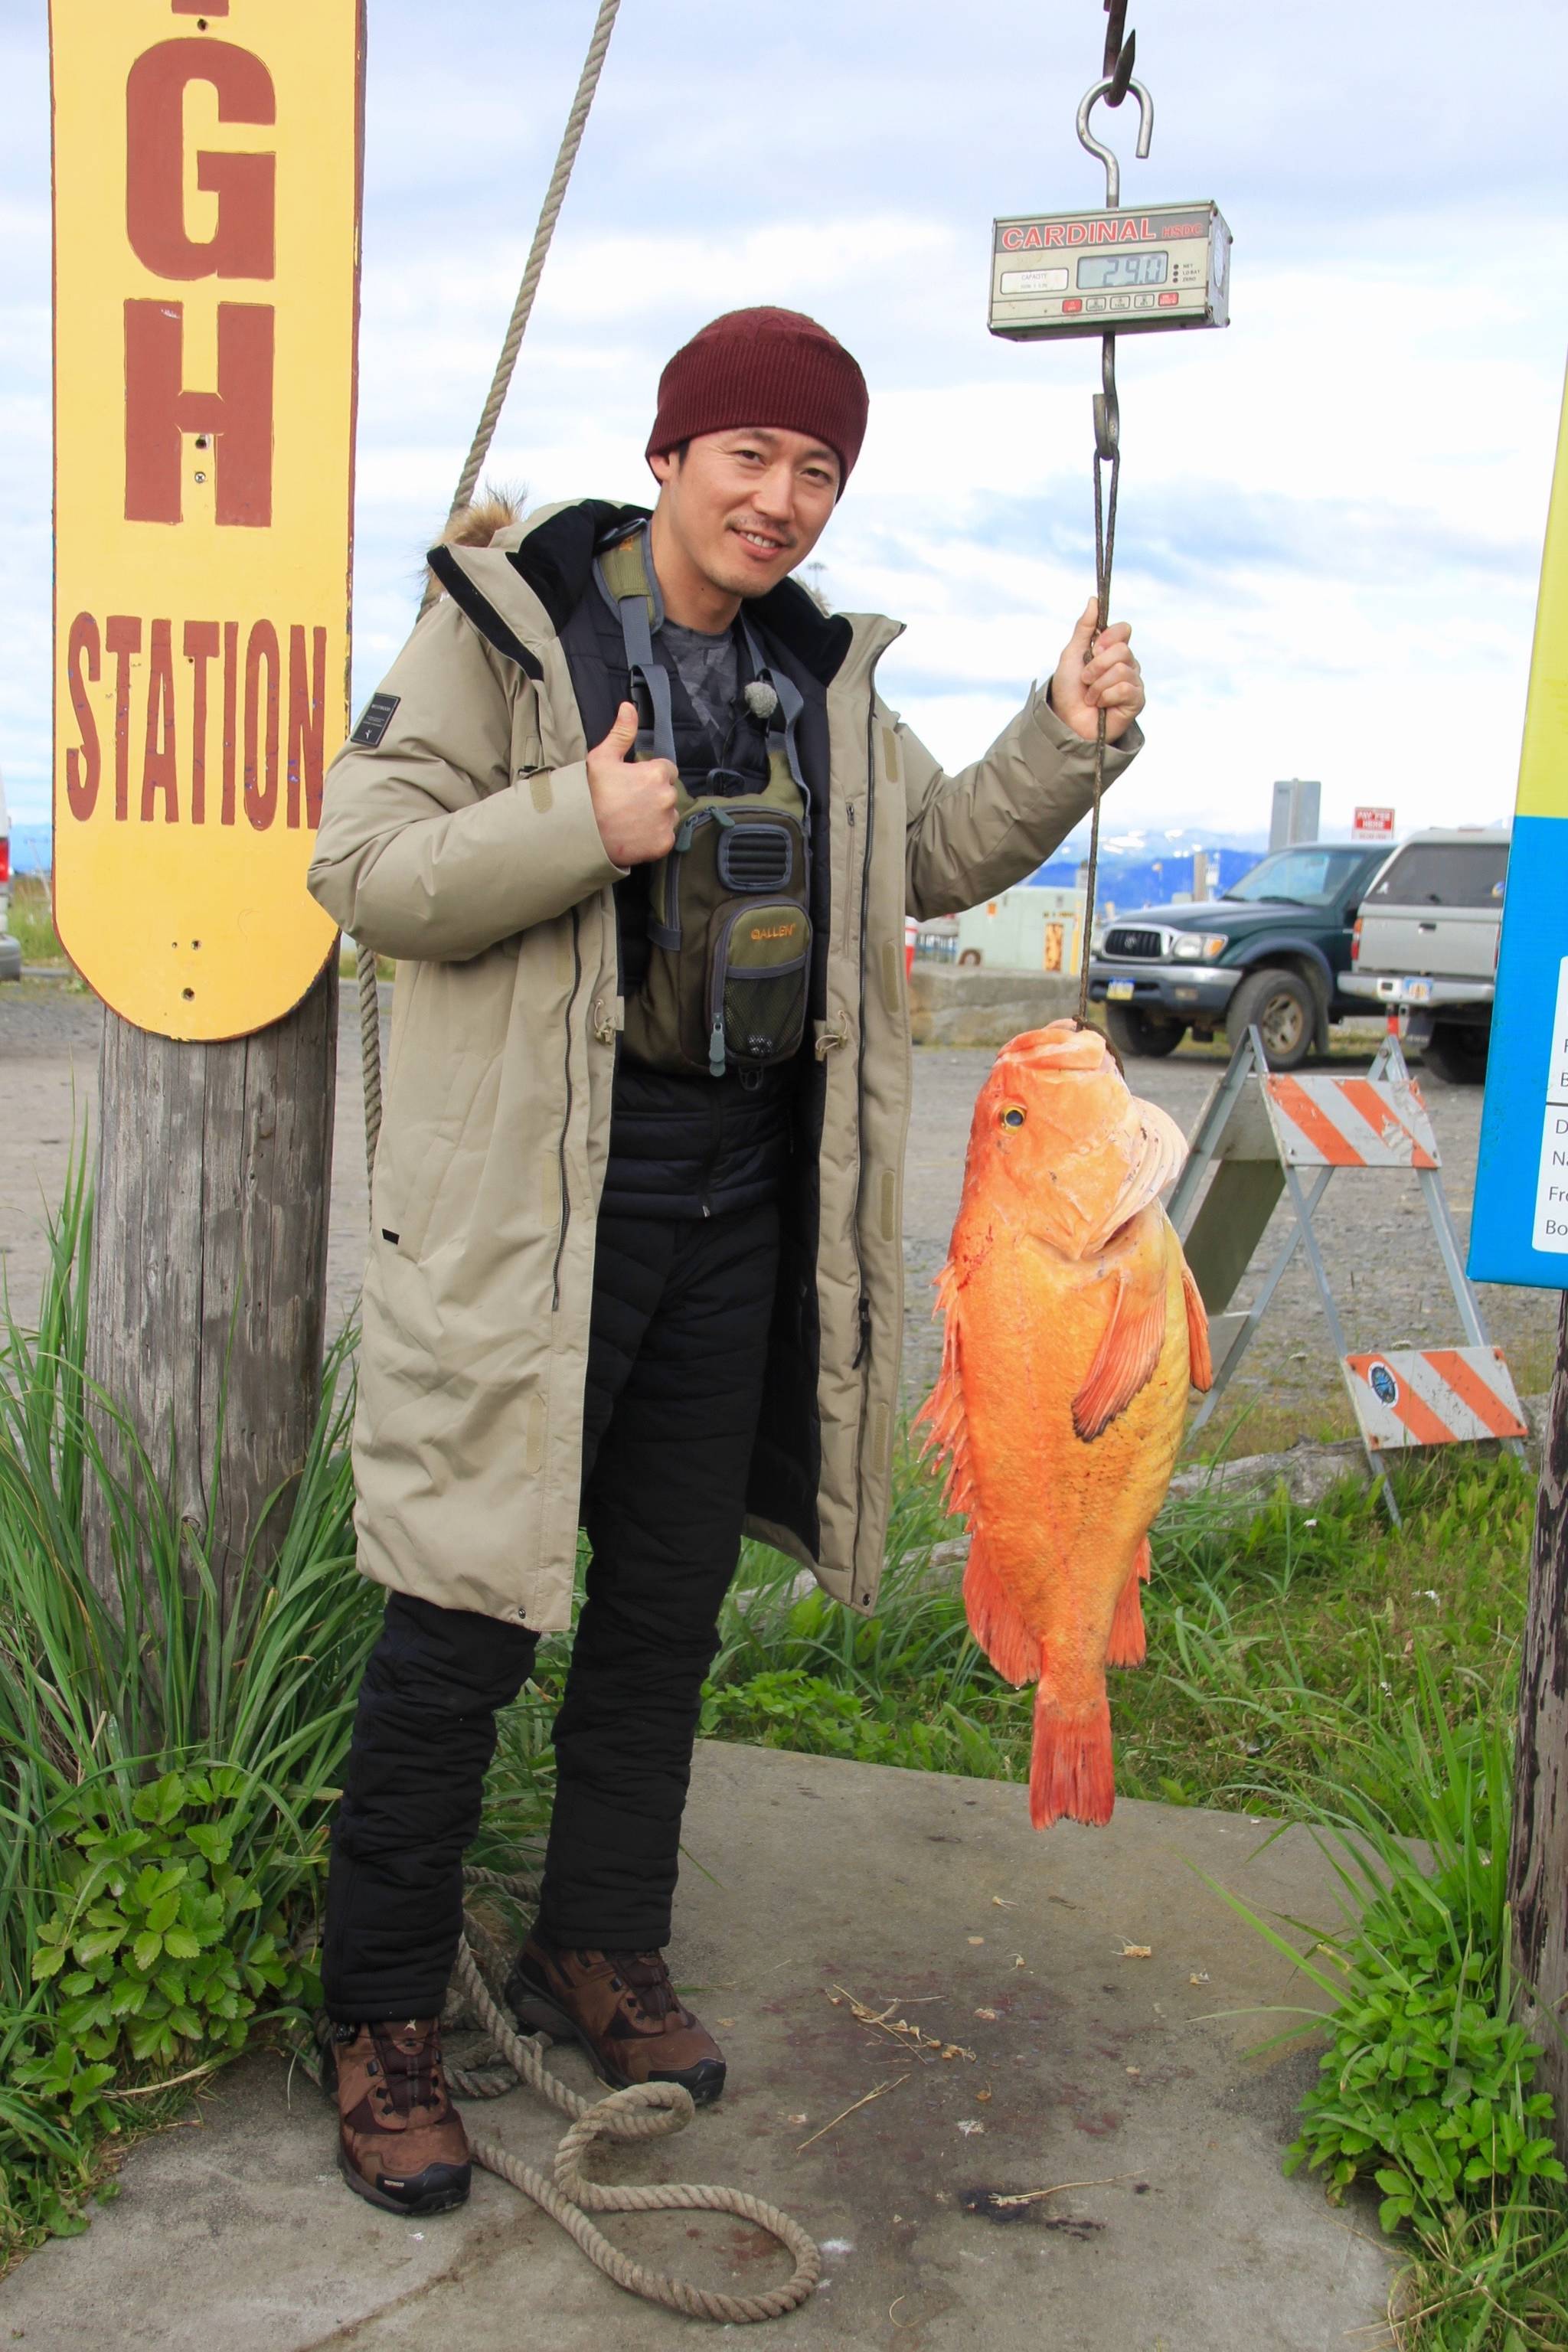 Korean pop star Jung Joon-young poses with a 21.4-pound yellow eye rockfish caught on July 30, 2018 while fishing with Captain Ross Hodek of Central Charters on the Spirit near Homer, Alaska. (Photo provided)